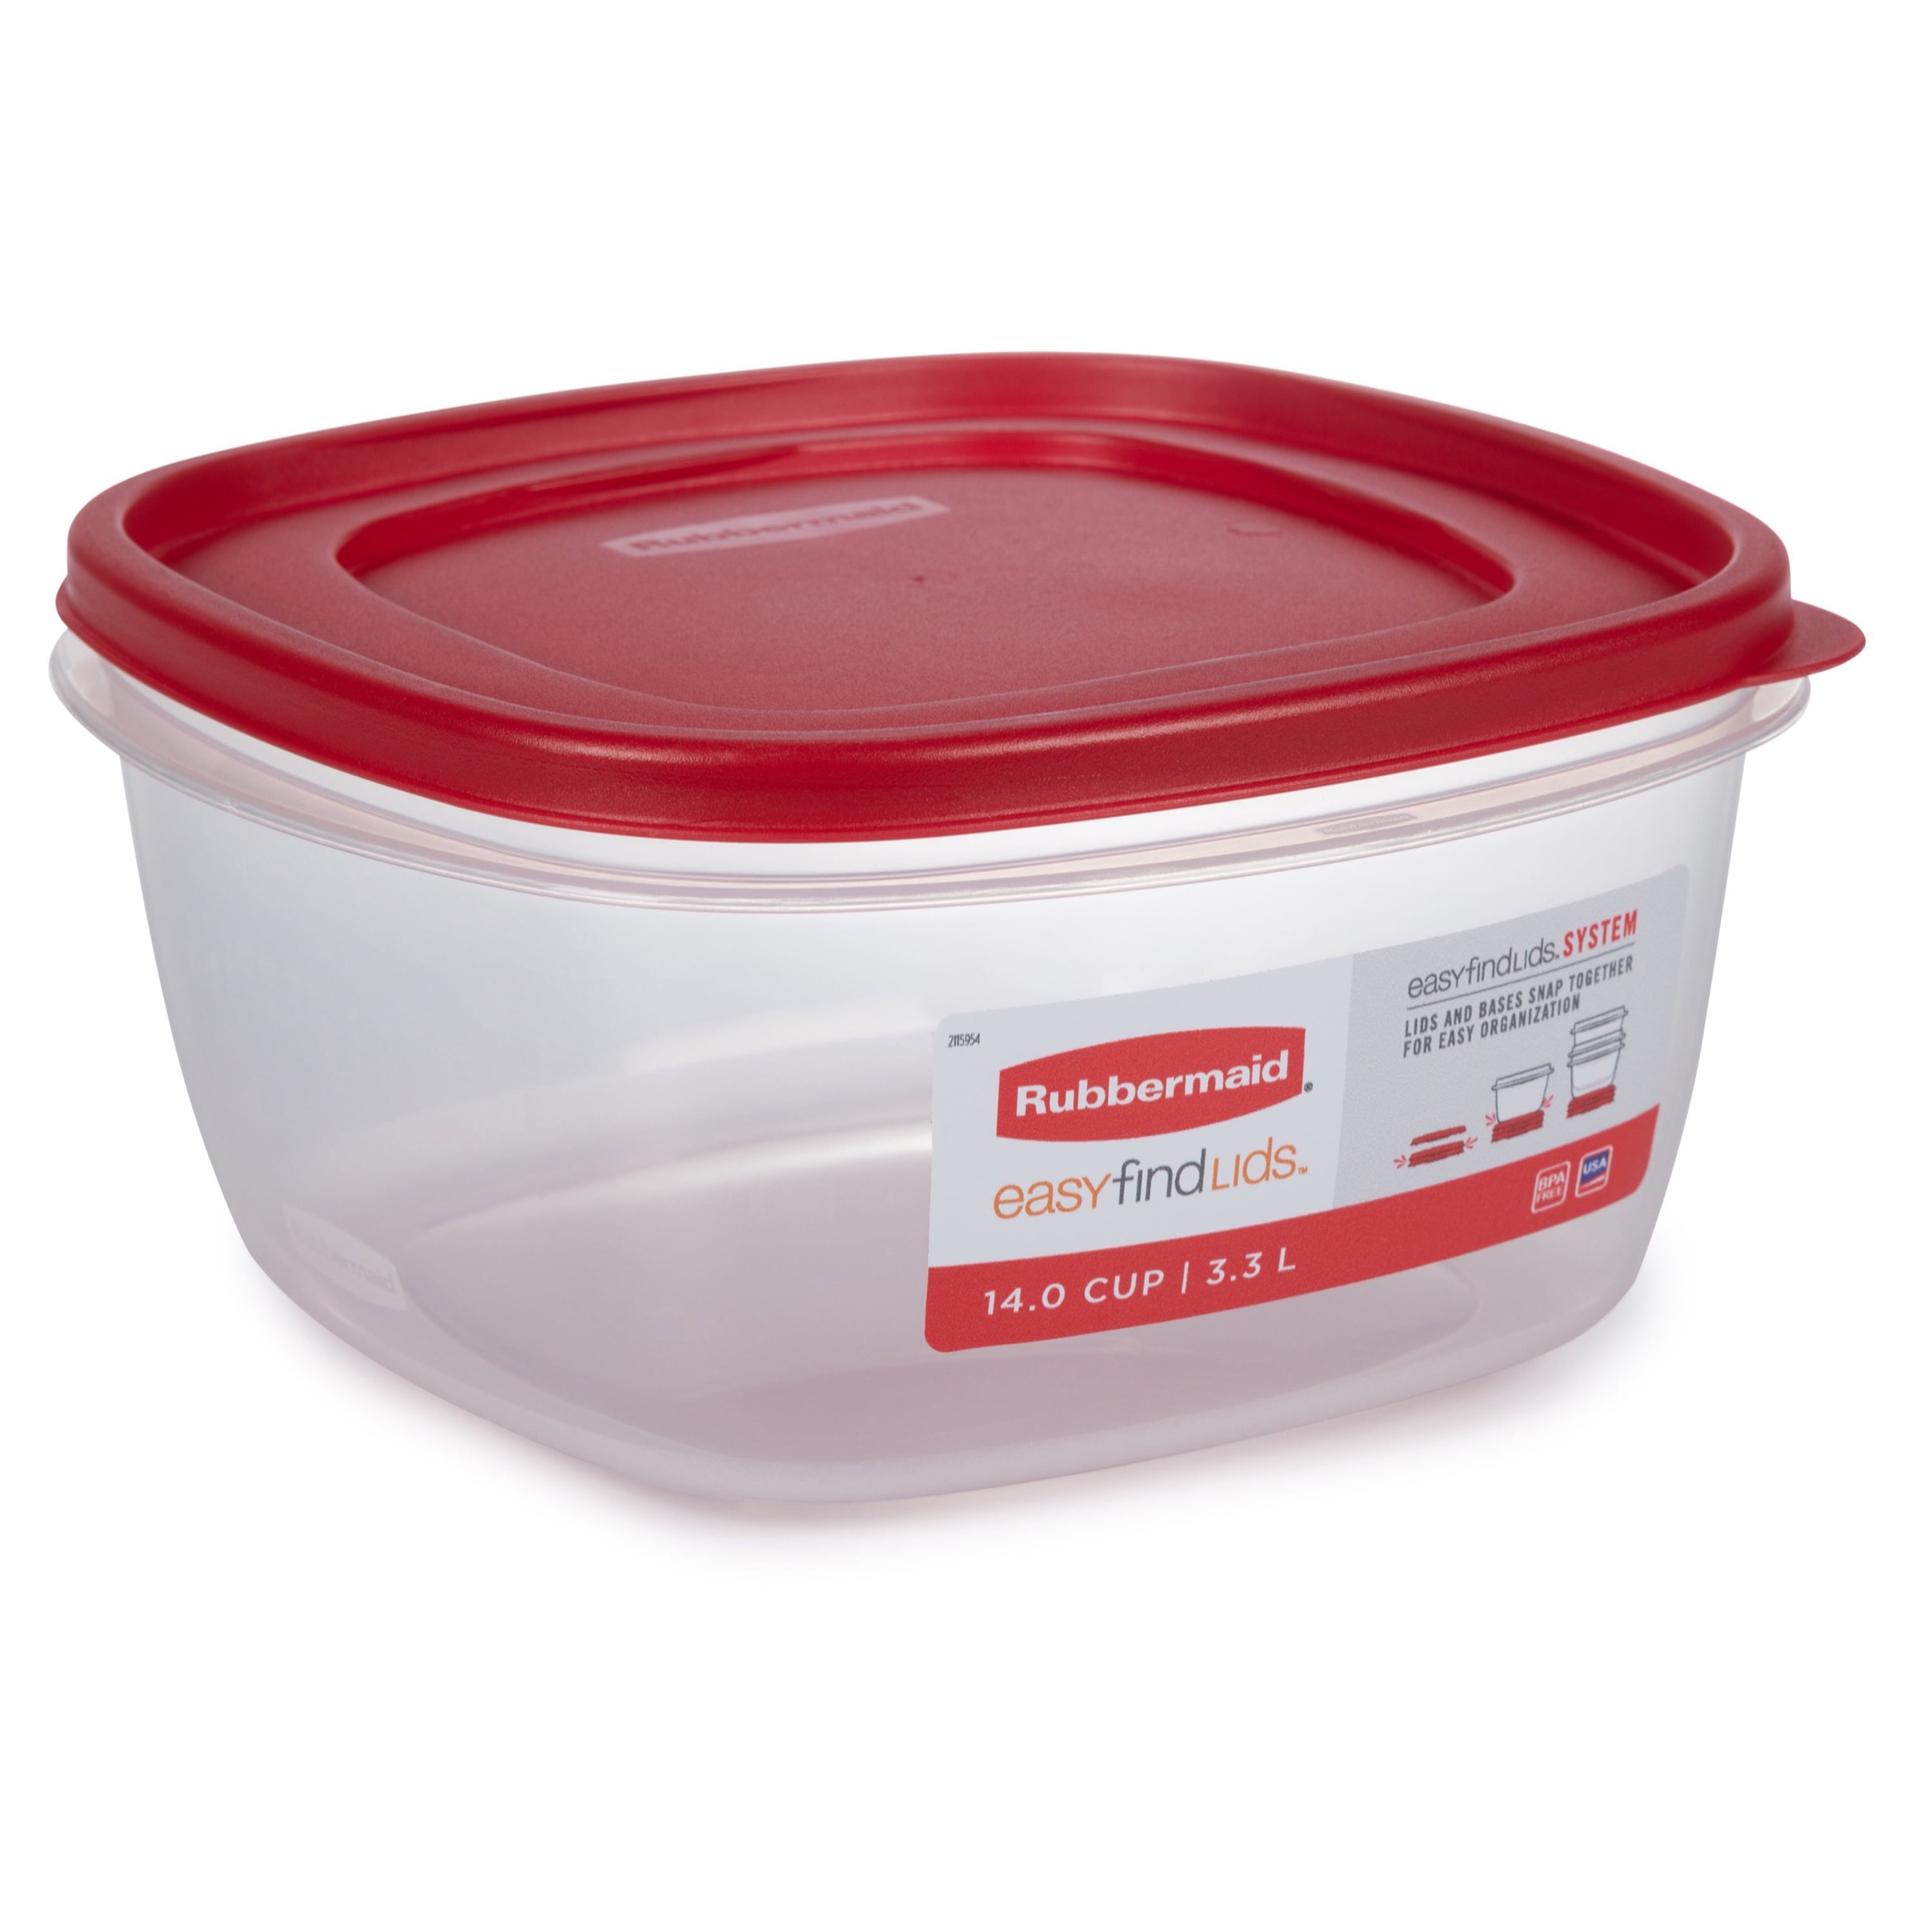 Save on Rubbermaid Easy Find Lids Value Pack Container & Lid 9